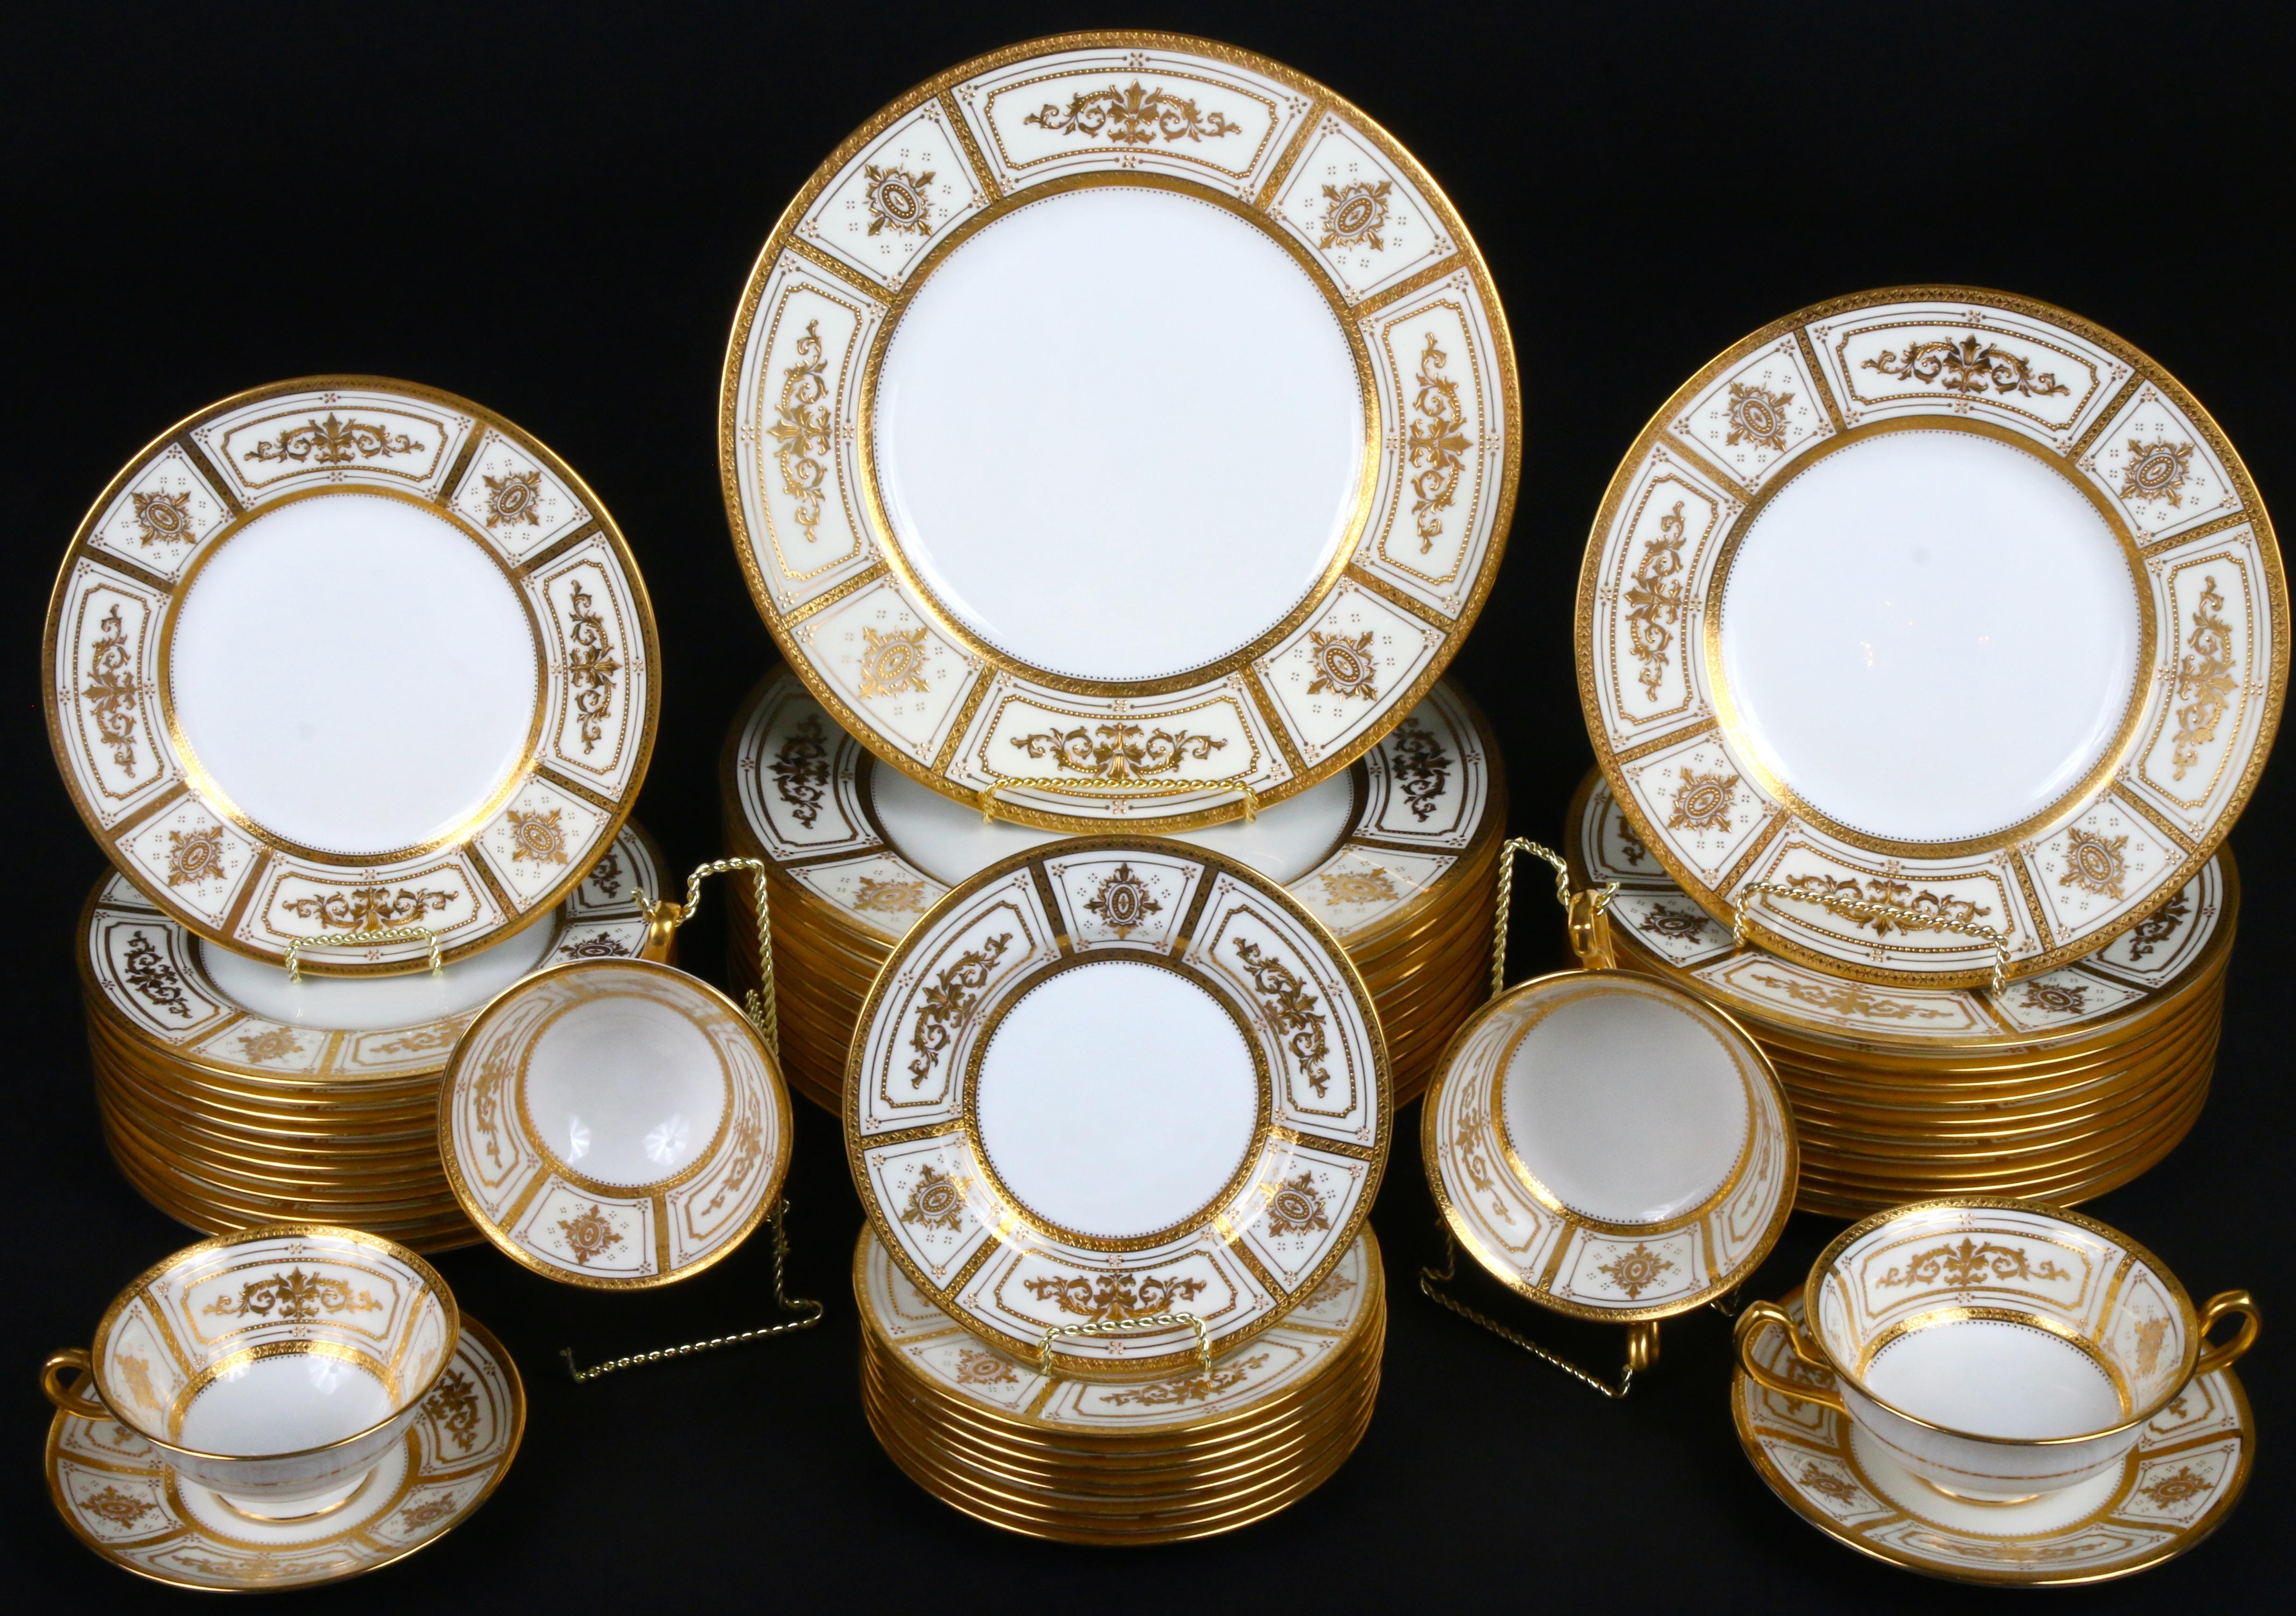 Here is a rare 22-karat gold on ivory ground complete service for 12 from Minton, Stoke-on Trent, England. The set includes dinner, salad, dessert and bread plates, as well as double-handled cream soups with underplates and teacups with saucers. One